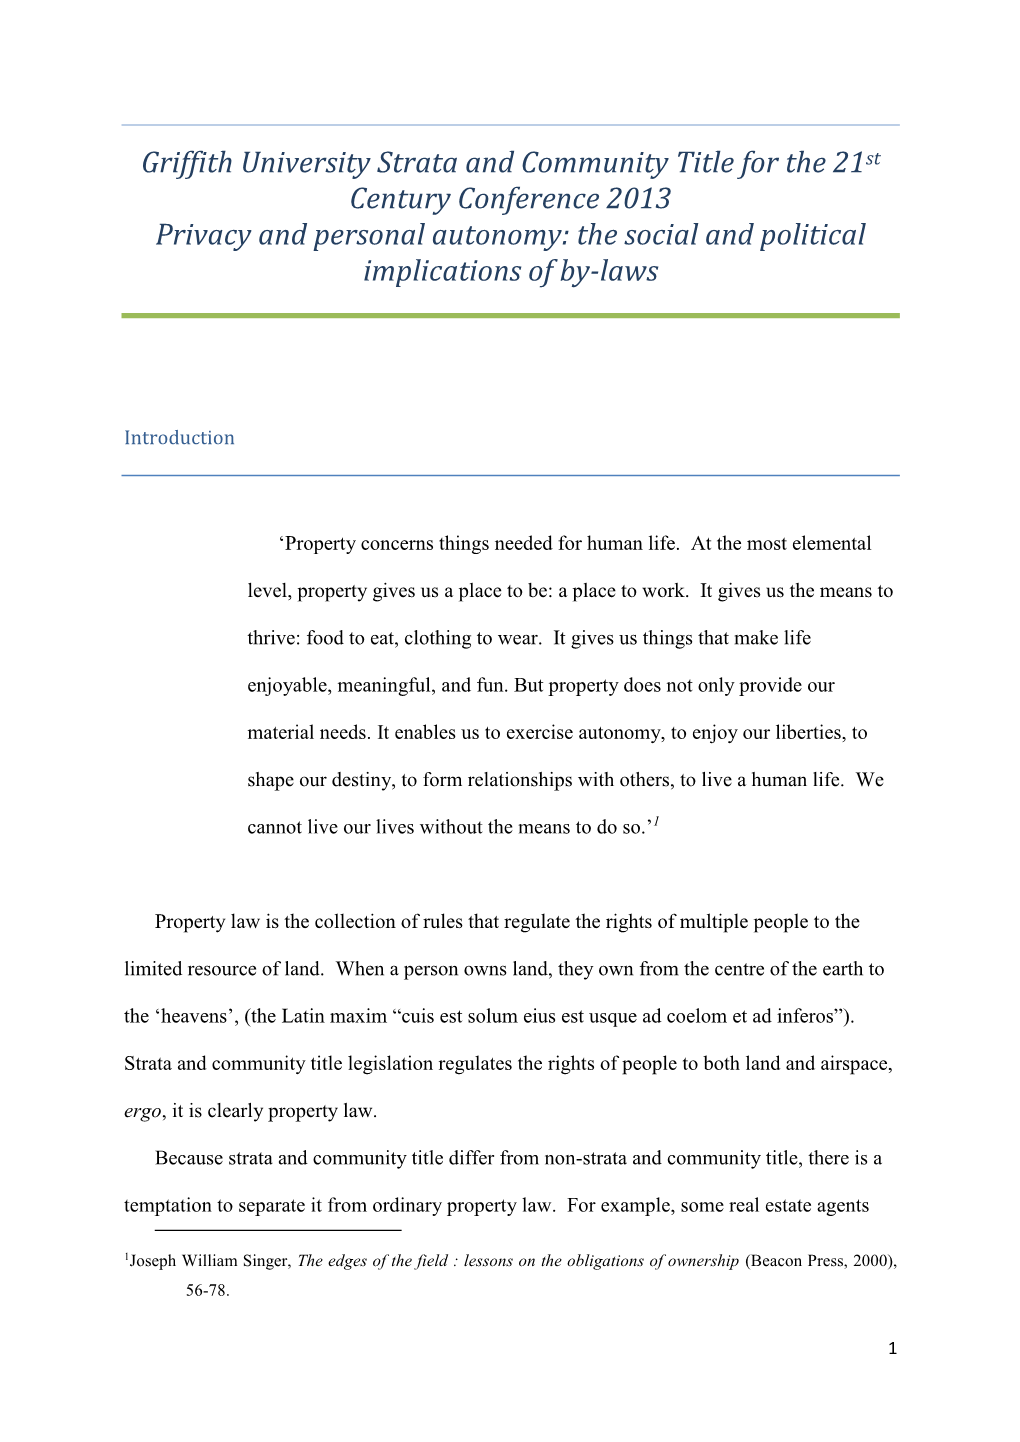 Griffith University Strata and Community Title for the 21St Century Conference 2013 Privacy and Personal Autonomy: the Social and Political Implications of By-Laws